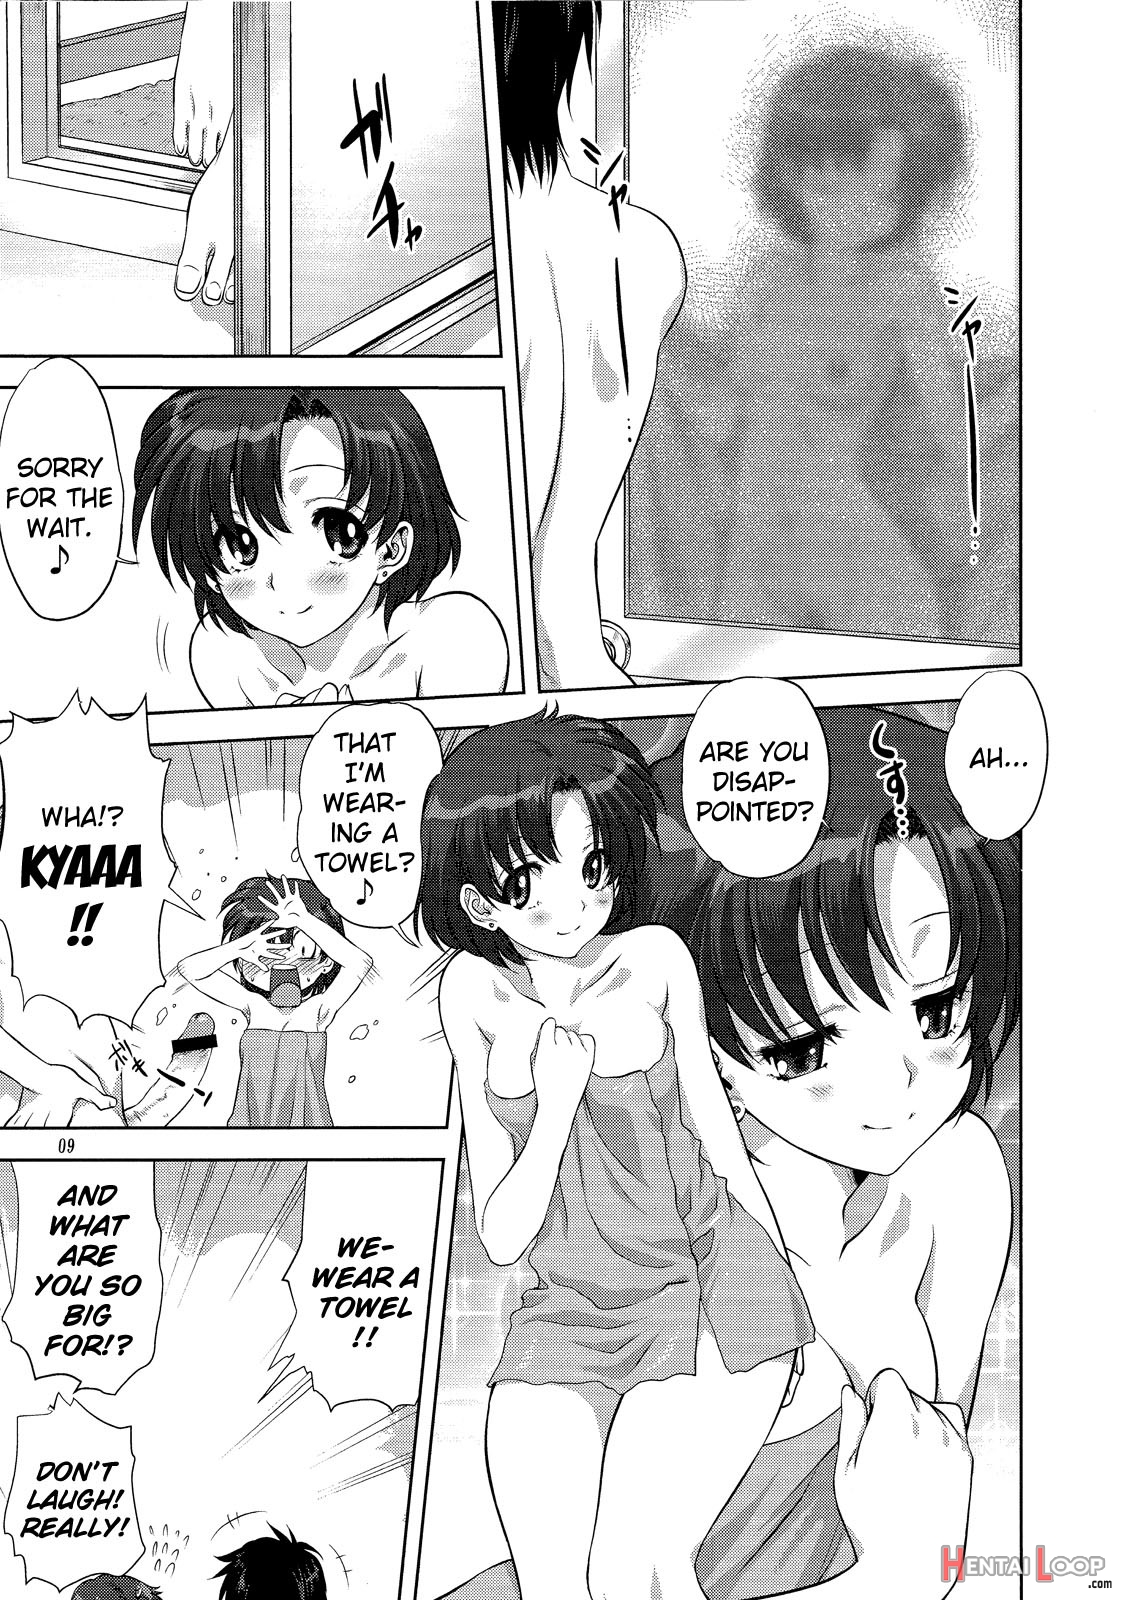 Together With Ami page 8